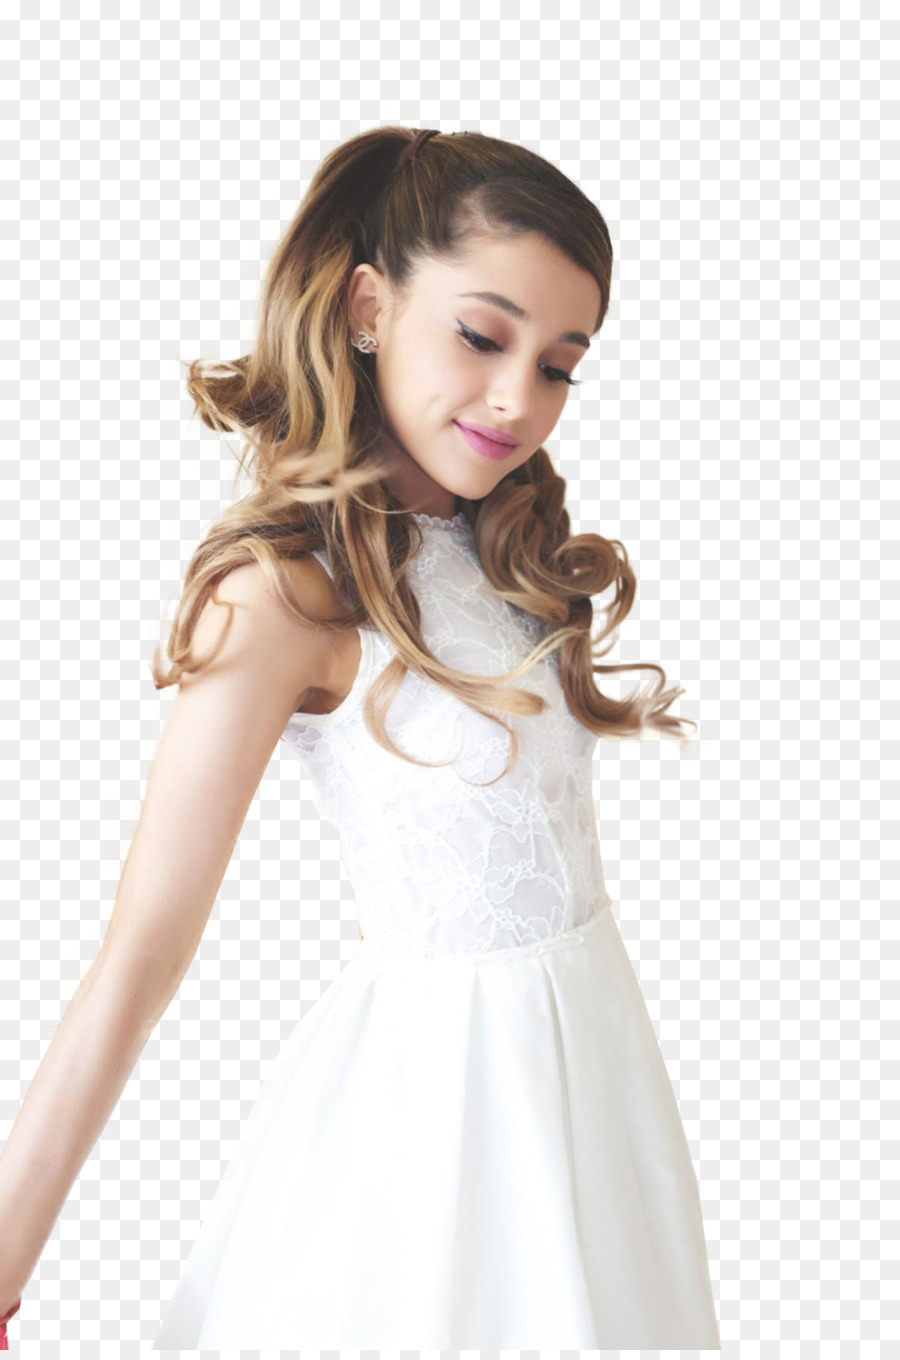 Ariana Grande Dress Photography Prom - ariana grande png download - 1024*1536 - Free Transparent  png Download.